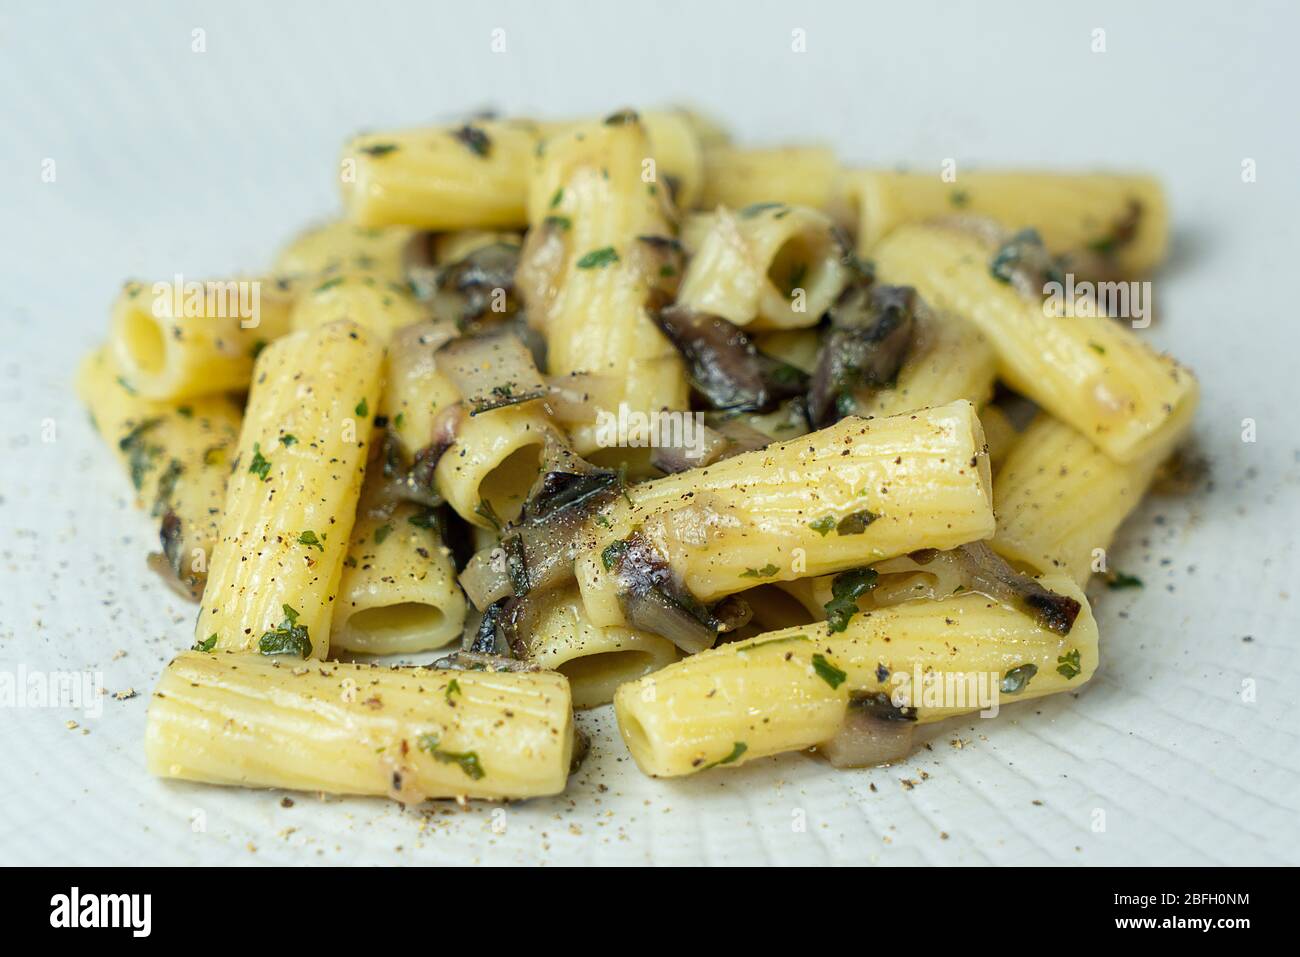 A dish of rigatoni with late red radicchio sauce Stock Photo